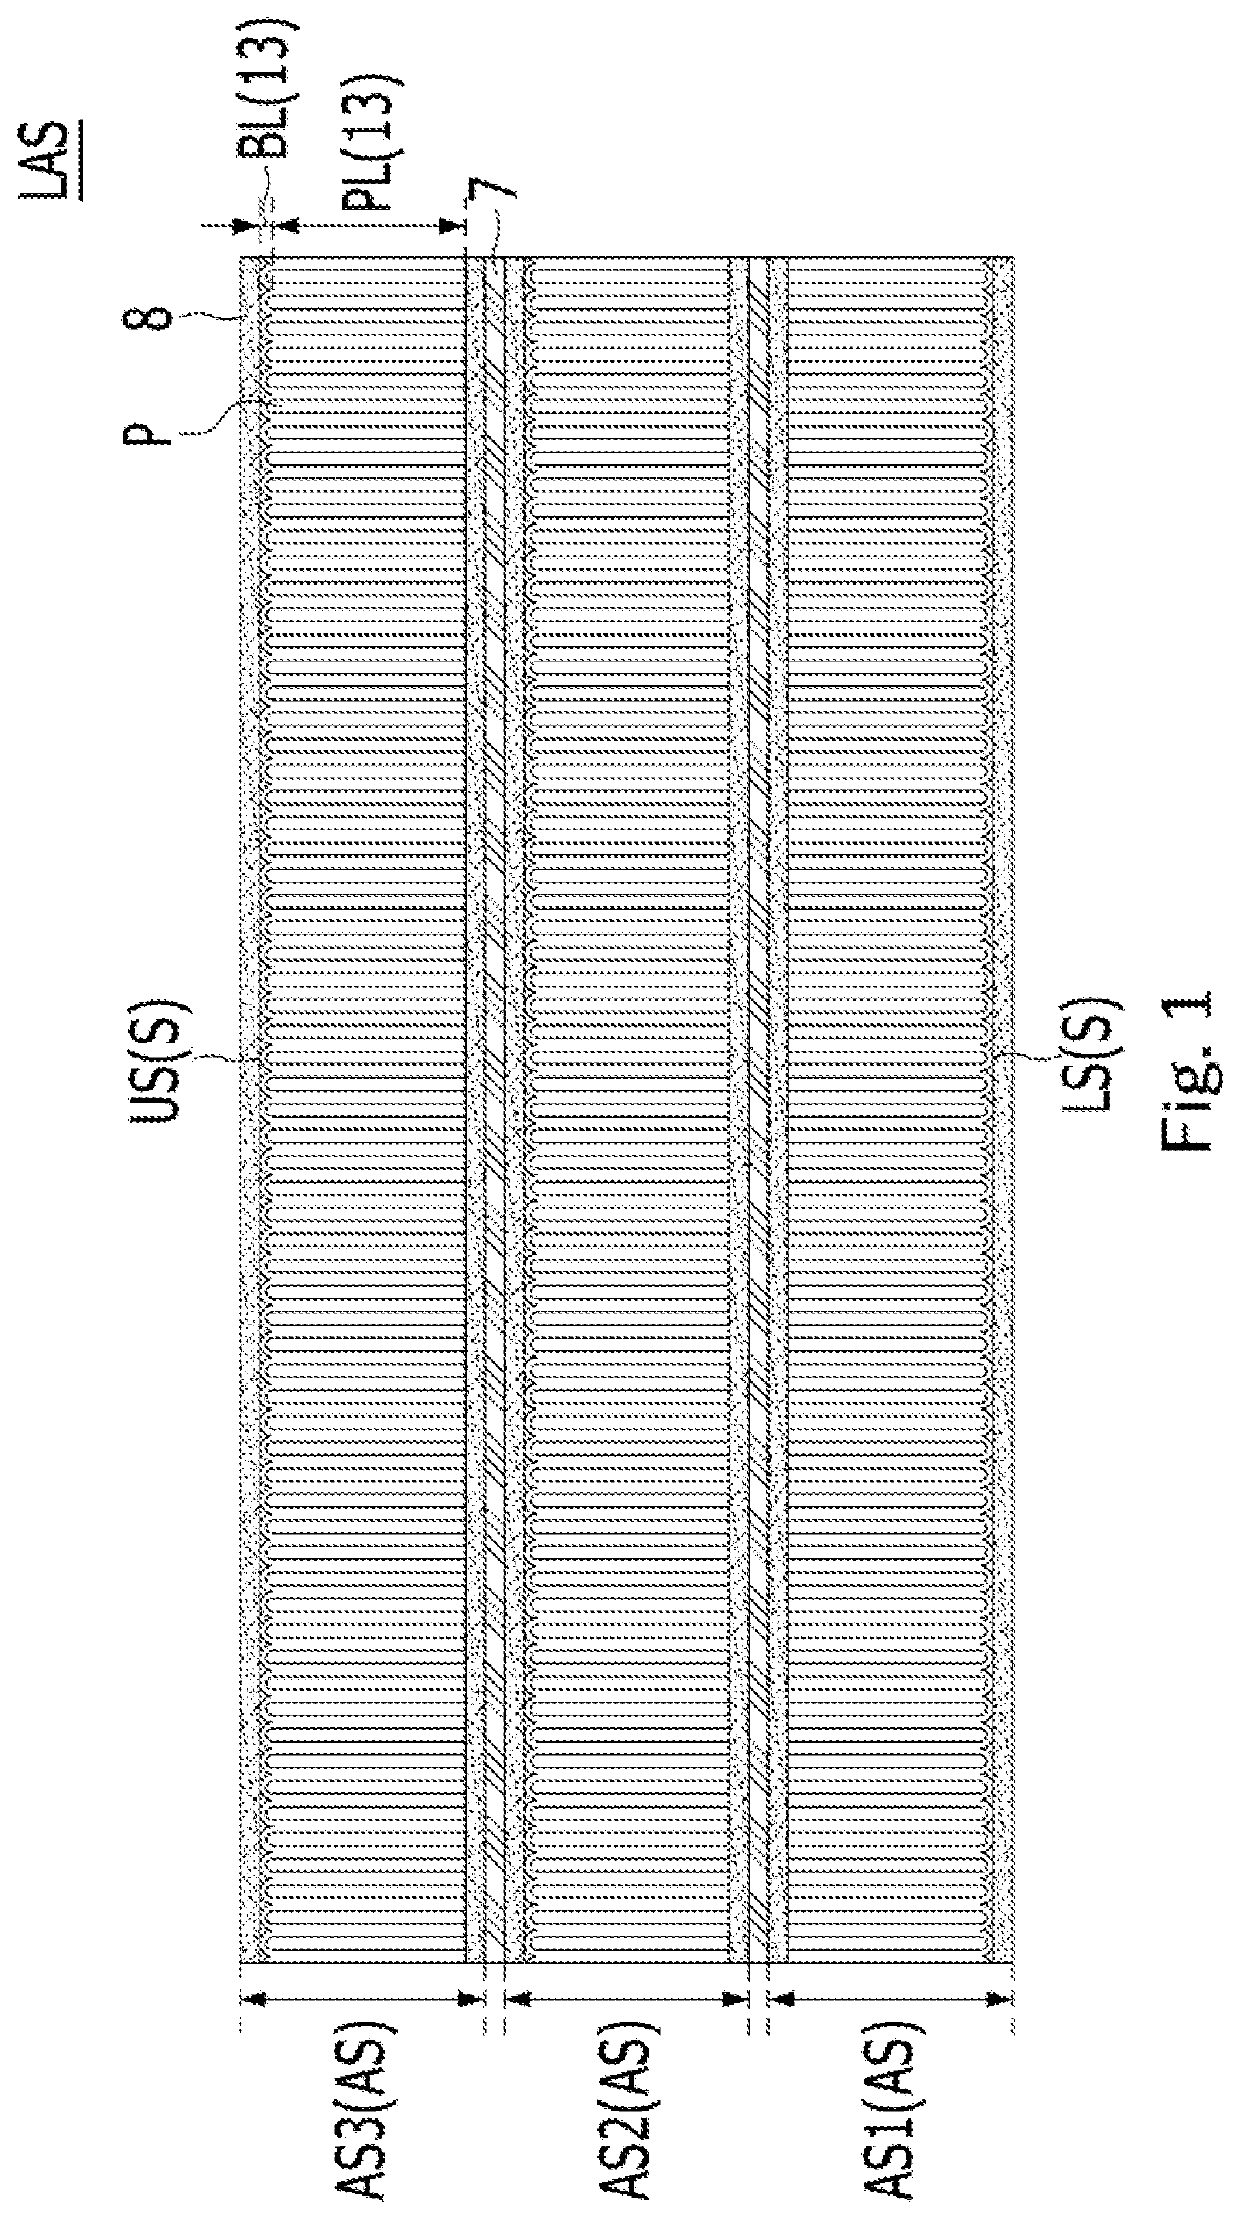 Laminated anodic oxide film structure